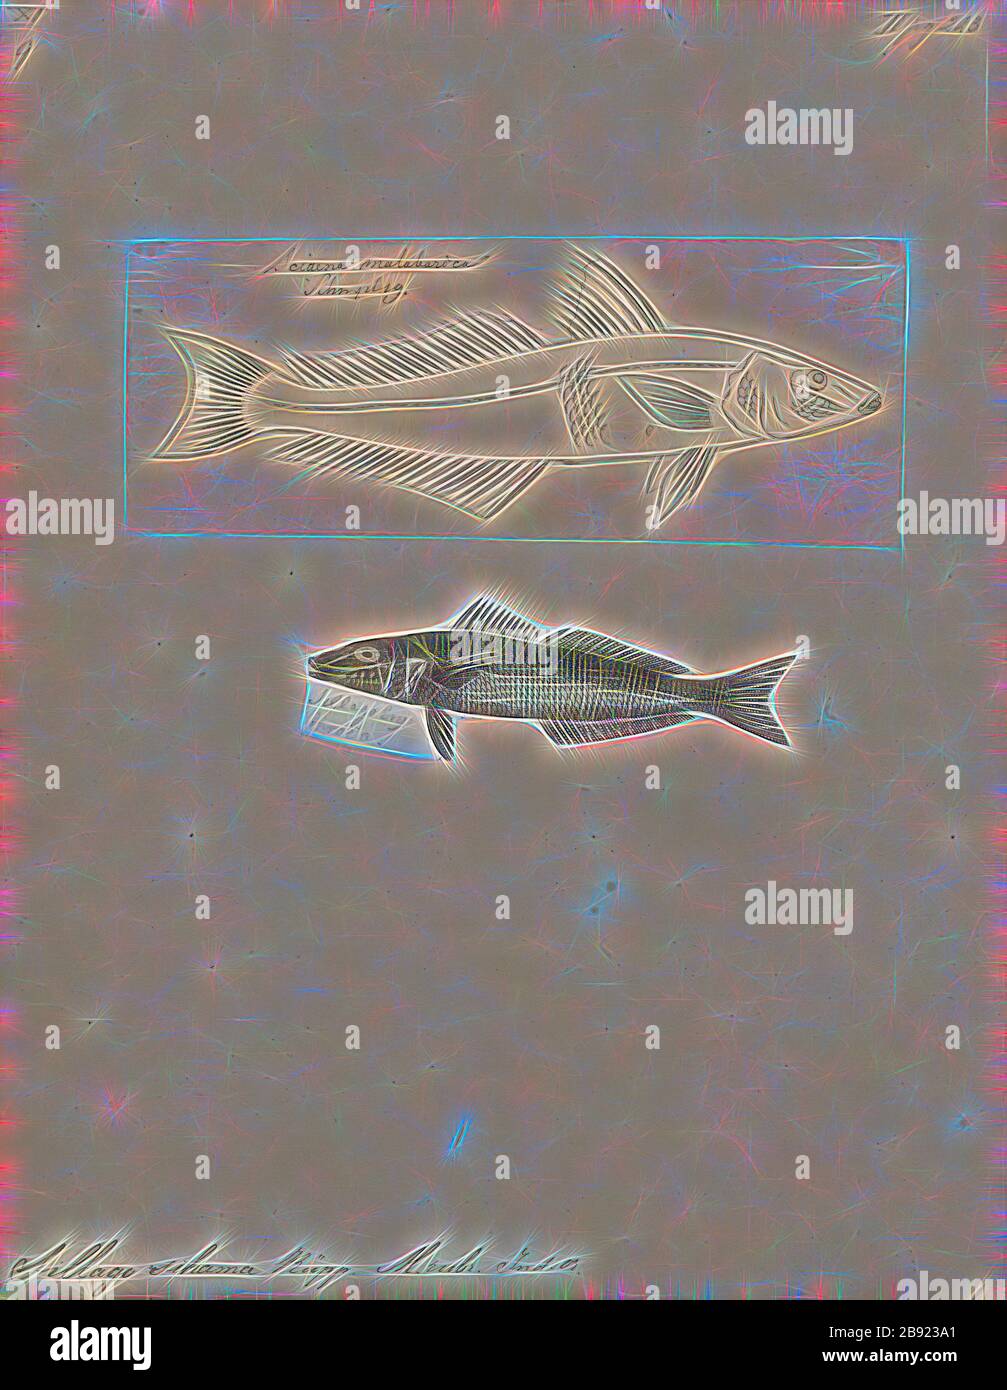 Sillago sihama, Print, The northern whiting, Sillago sihama (also known as the silver whiting and sand smelt), is a marine fish, the most widespread and abundant member of the smelt-whiting family Sillaginidae. The northern whiting was the first species of sillaginid scientifically described and is therefore the type species of both the family Sillaginidae and the genus Sillago. The species is distributed in the Indo-Pacific region from South Africa in the west to Japan and Indonesia in the east, also becoming an invasive species to the Mediterranean through the Suez Canal. The northern whitin Stock Photo